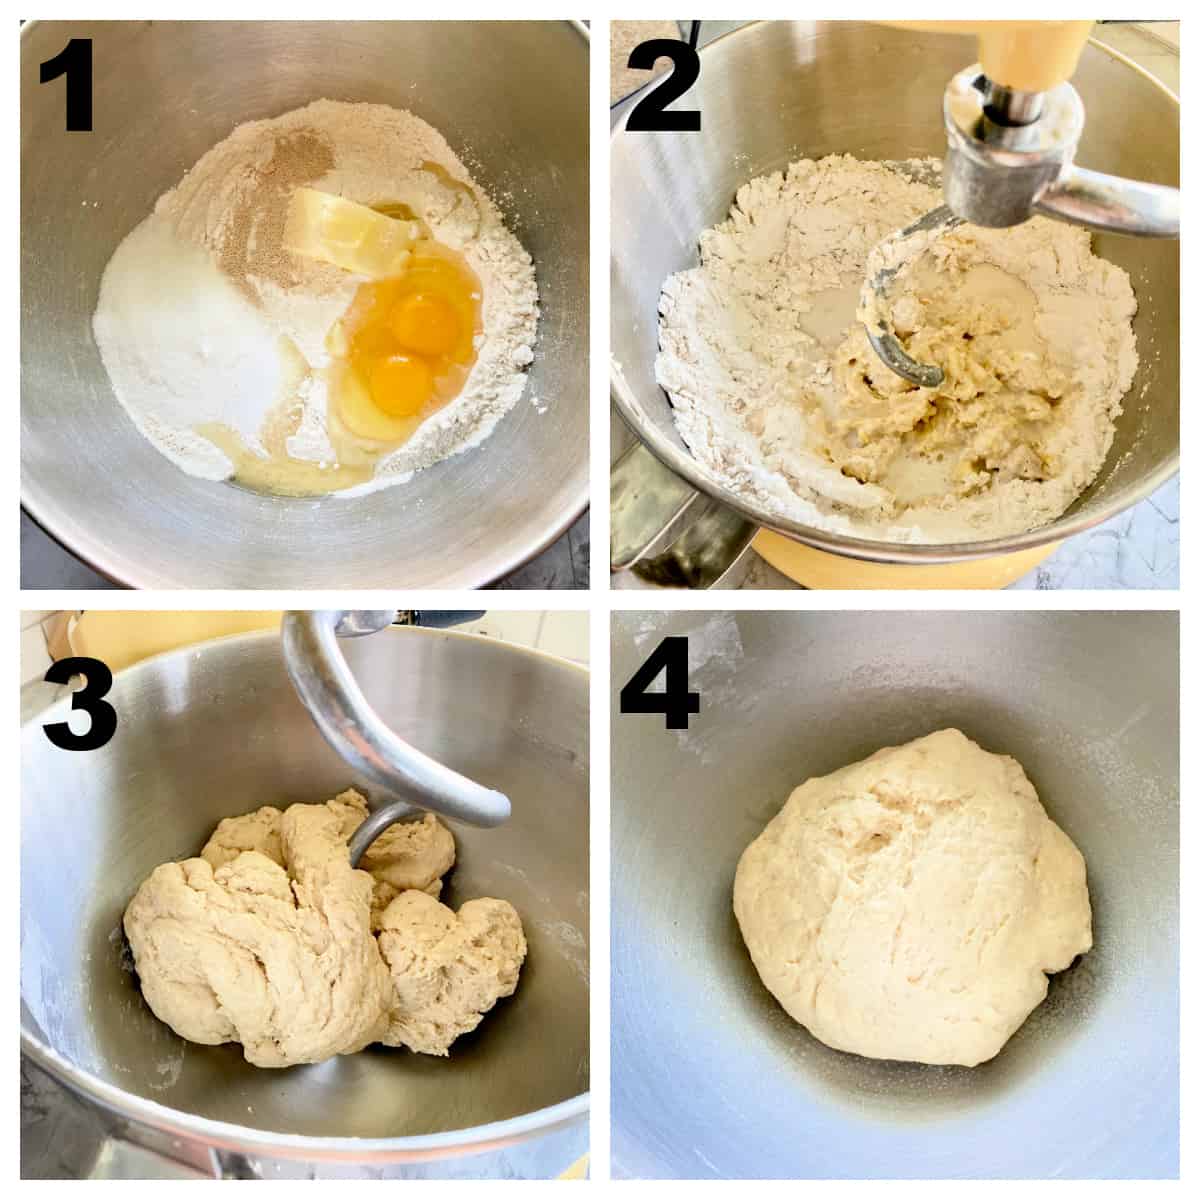 Four steps of mixing the dough for cinnmaon rolls.